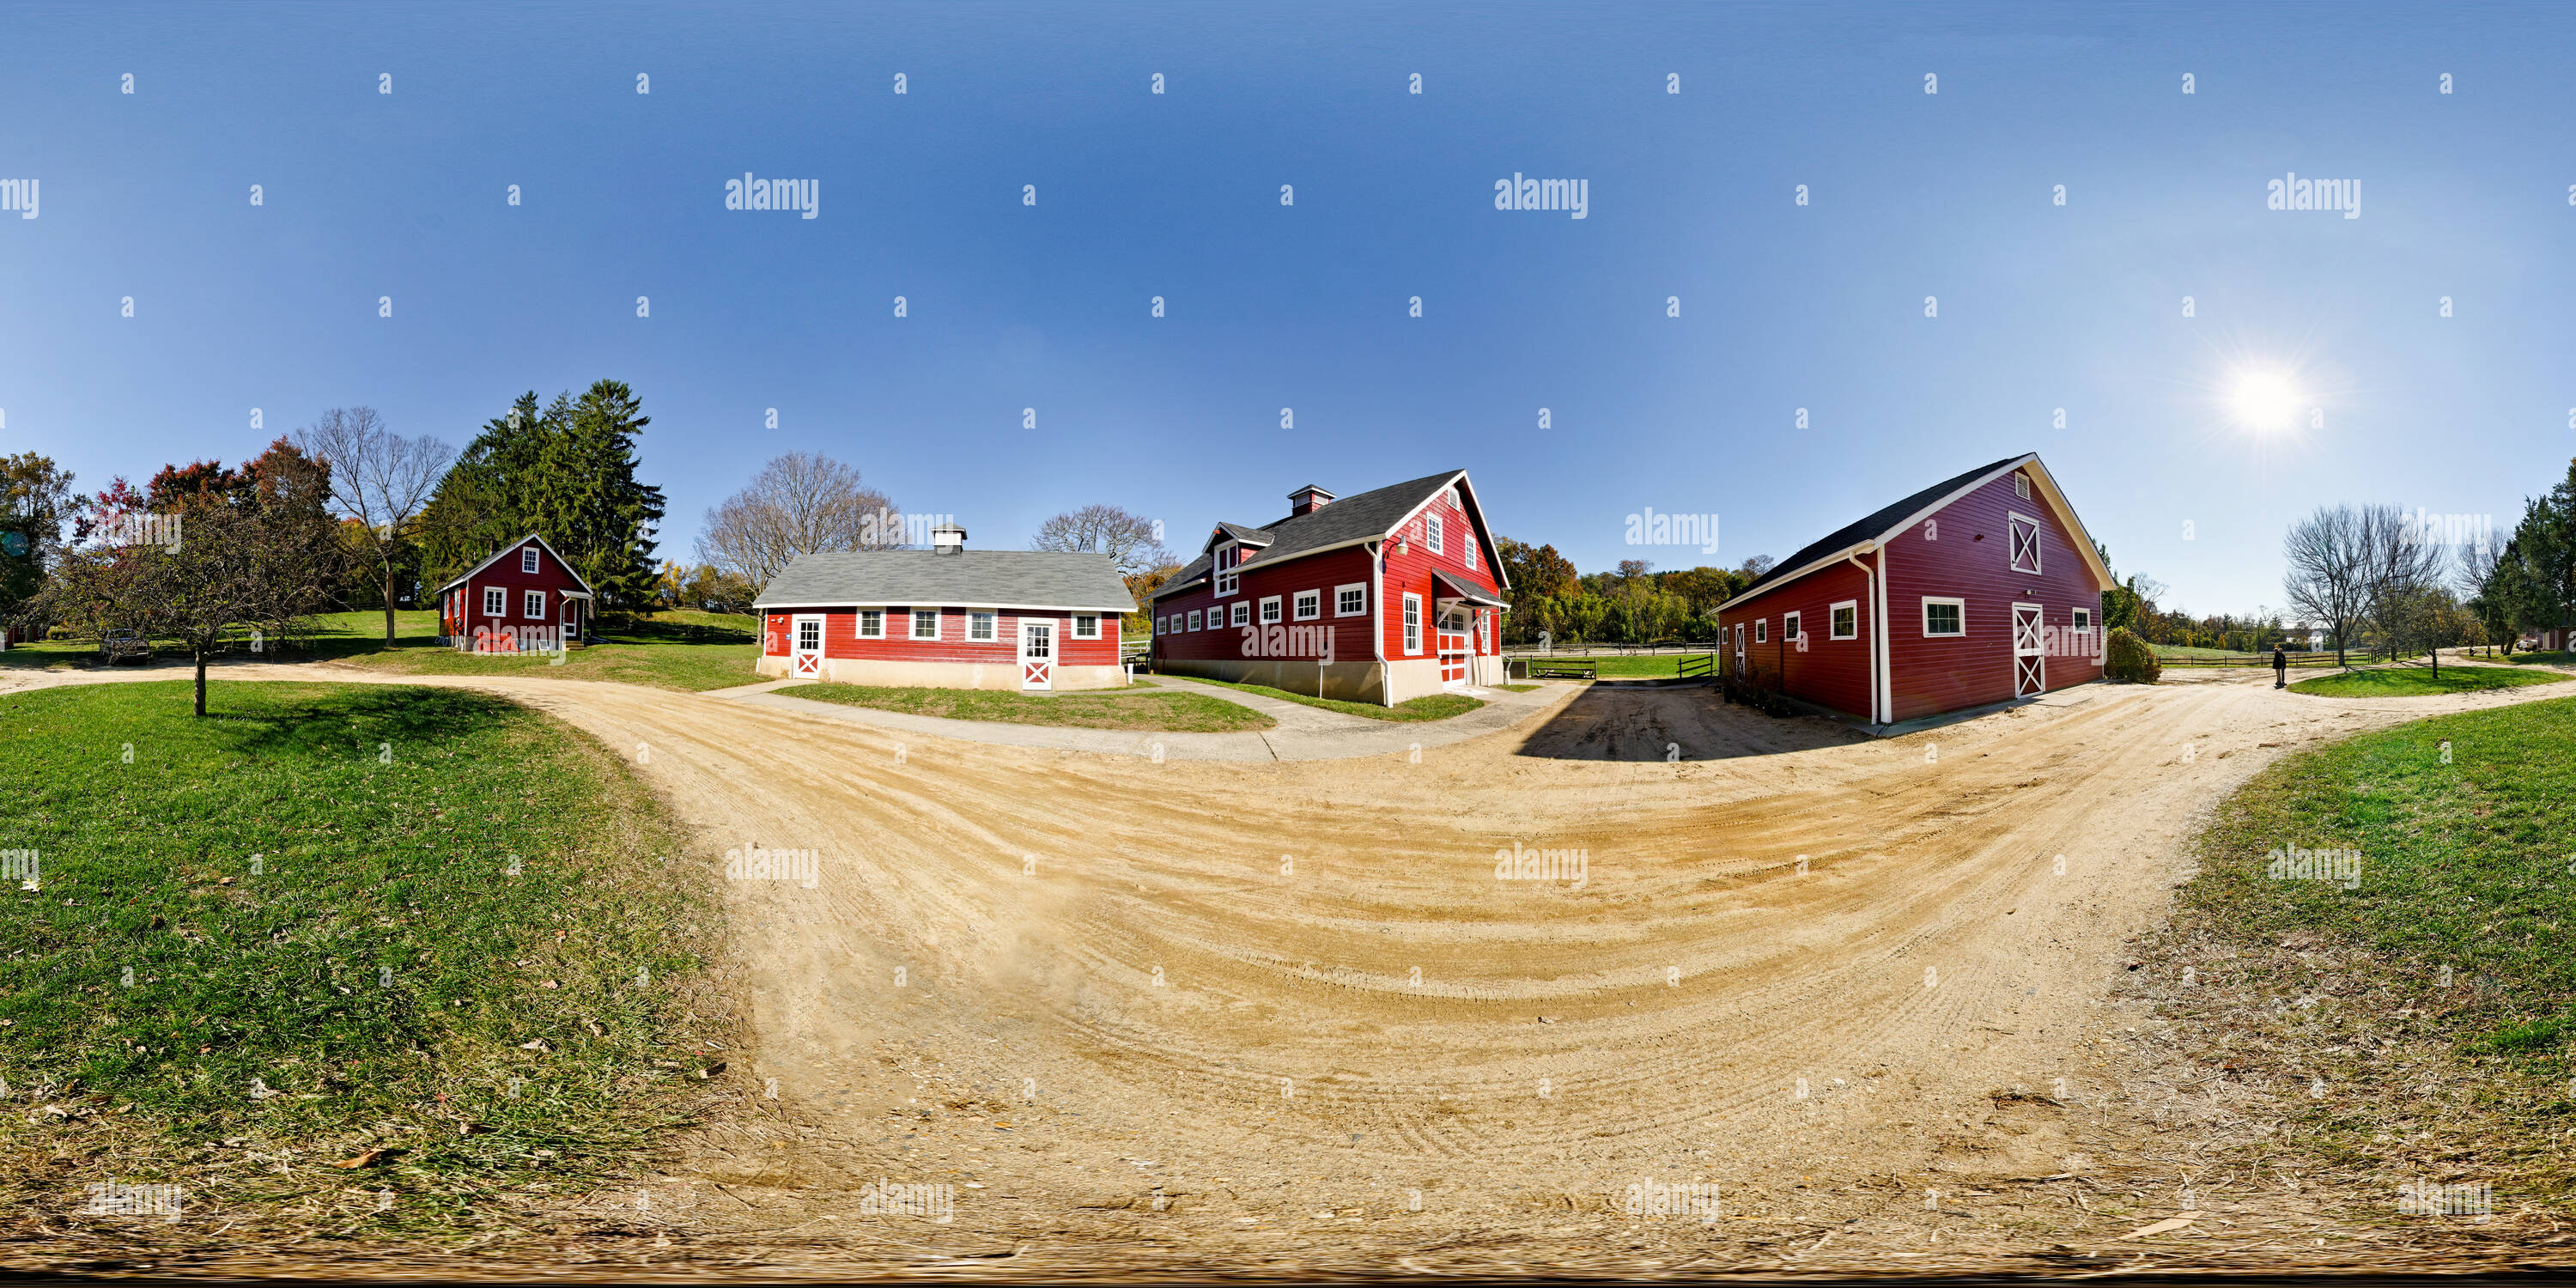 360 degree panoramic view of Equestrian Center, Huber Woods, New Jersey